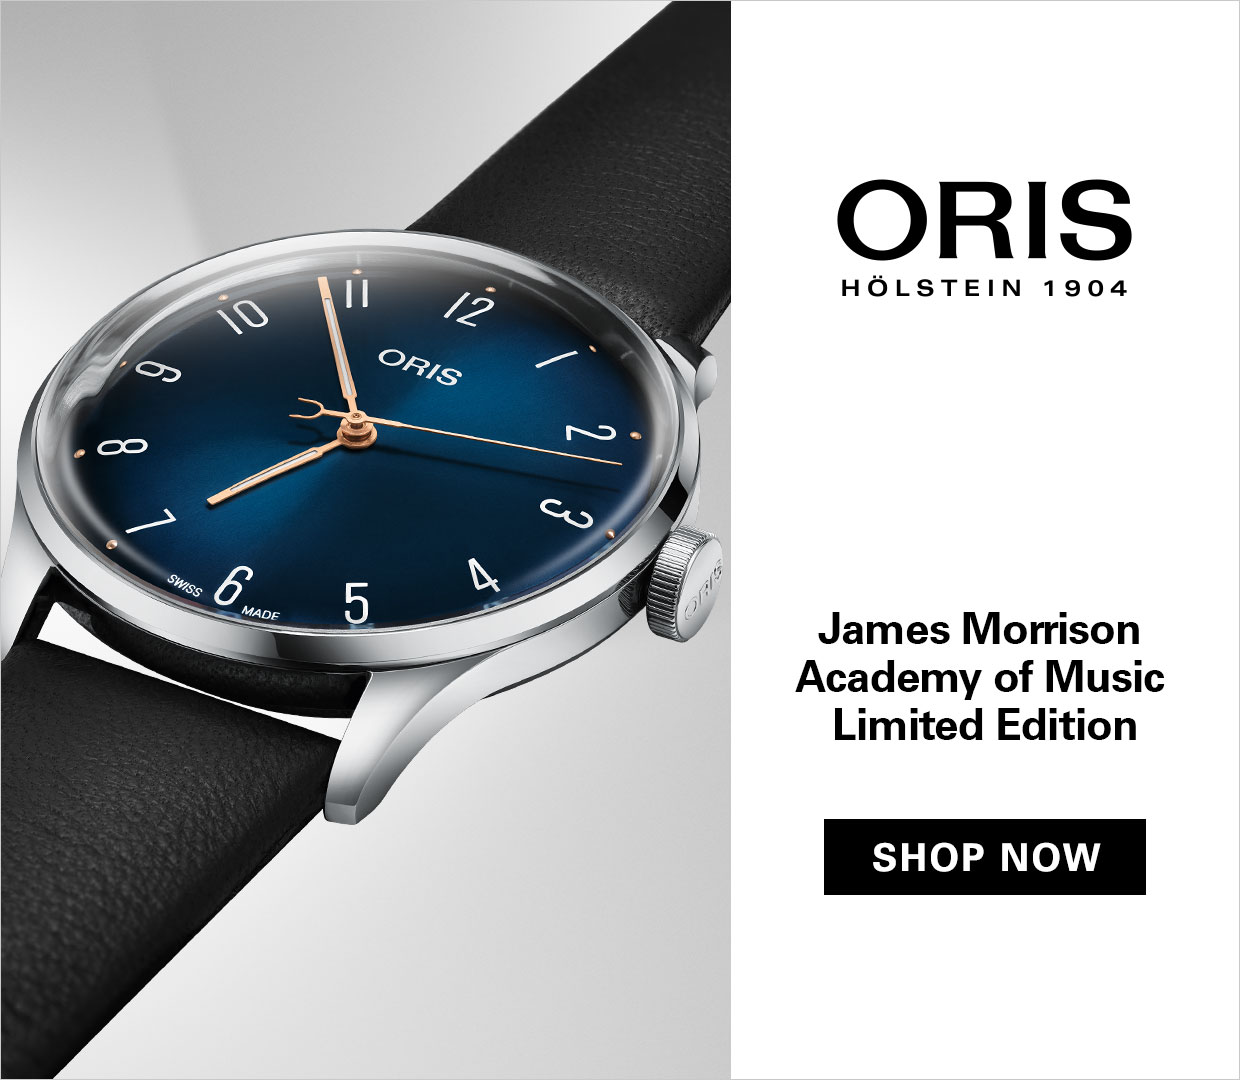 Click here to Shop Oris' James Morrison Academy of Music Limited Edition!